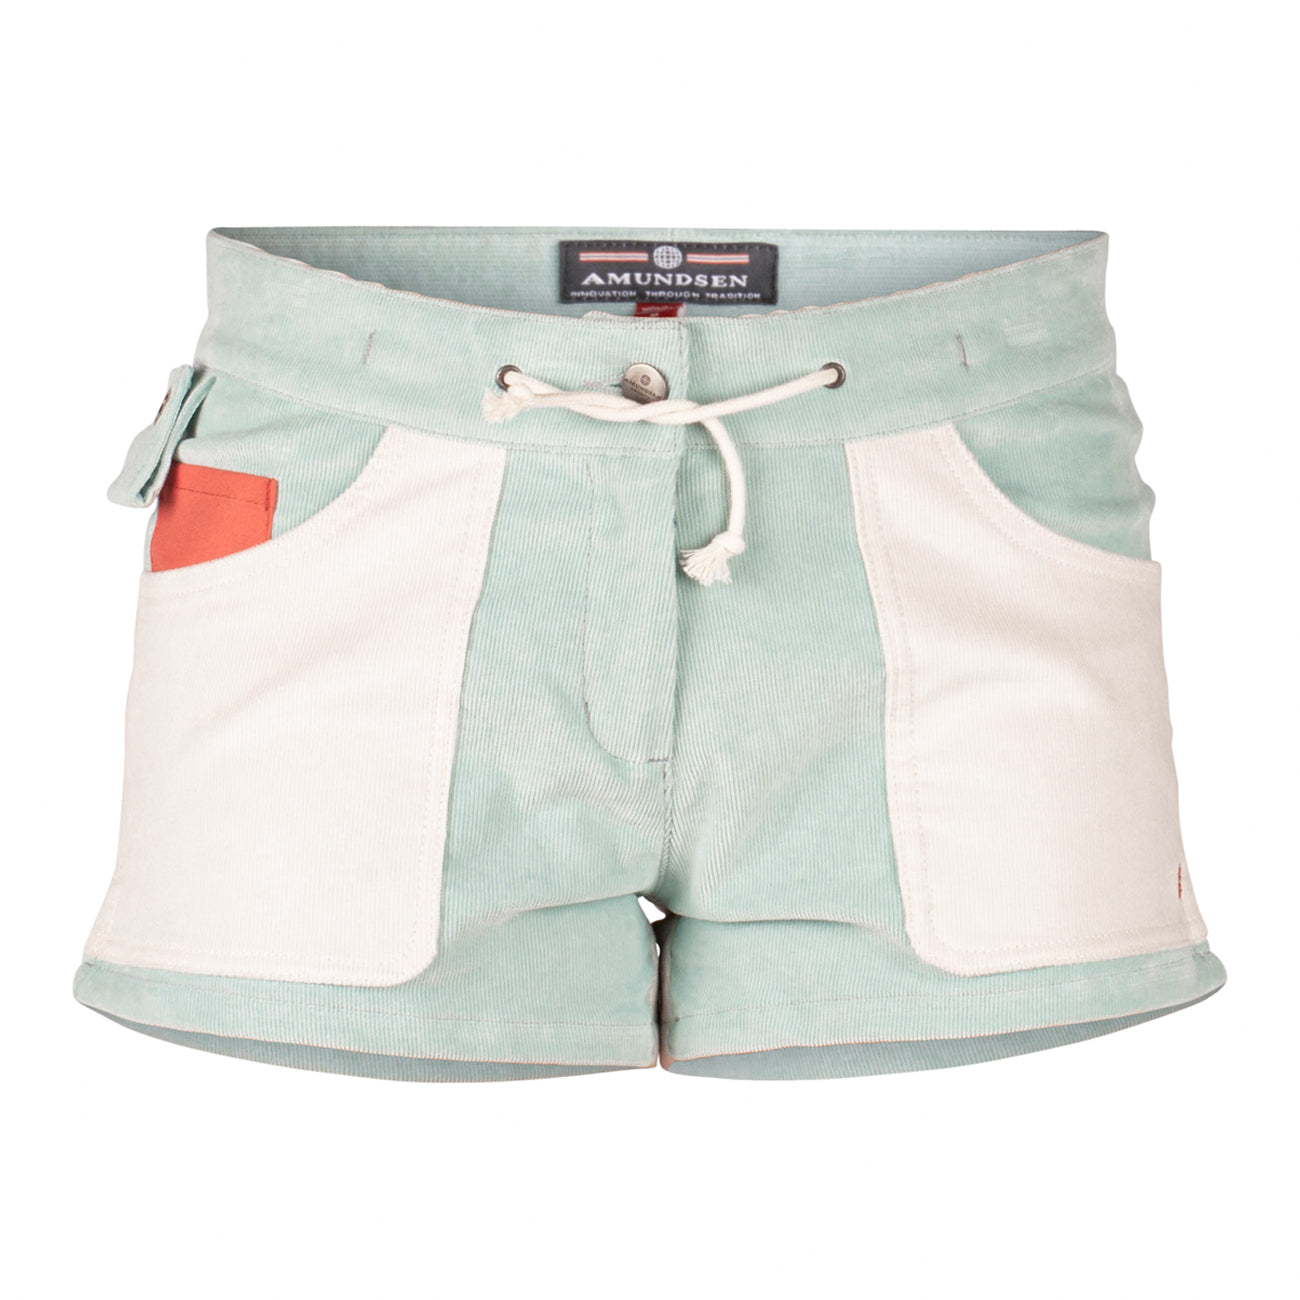 3 Incher Concord Shorts Womens - Gray Mist/Natural